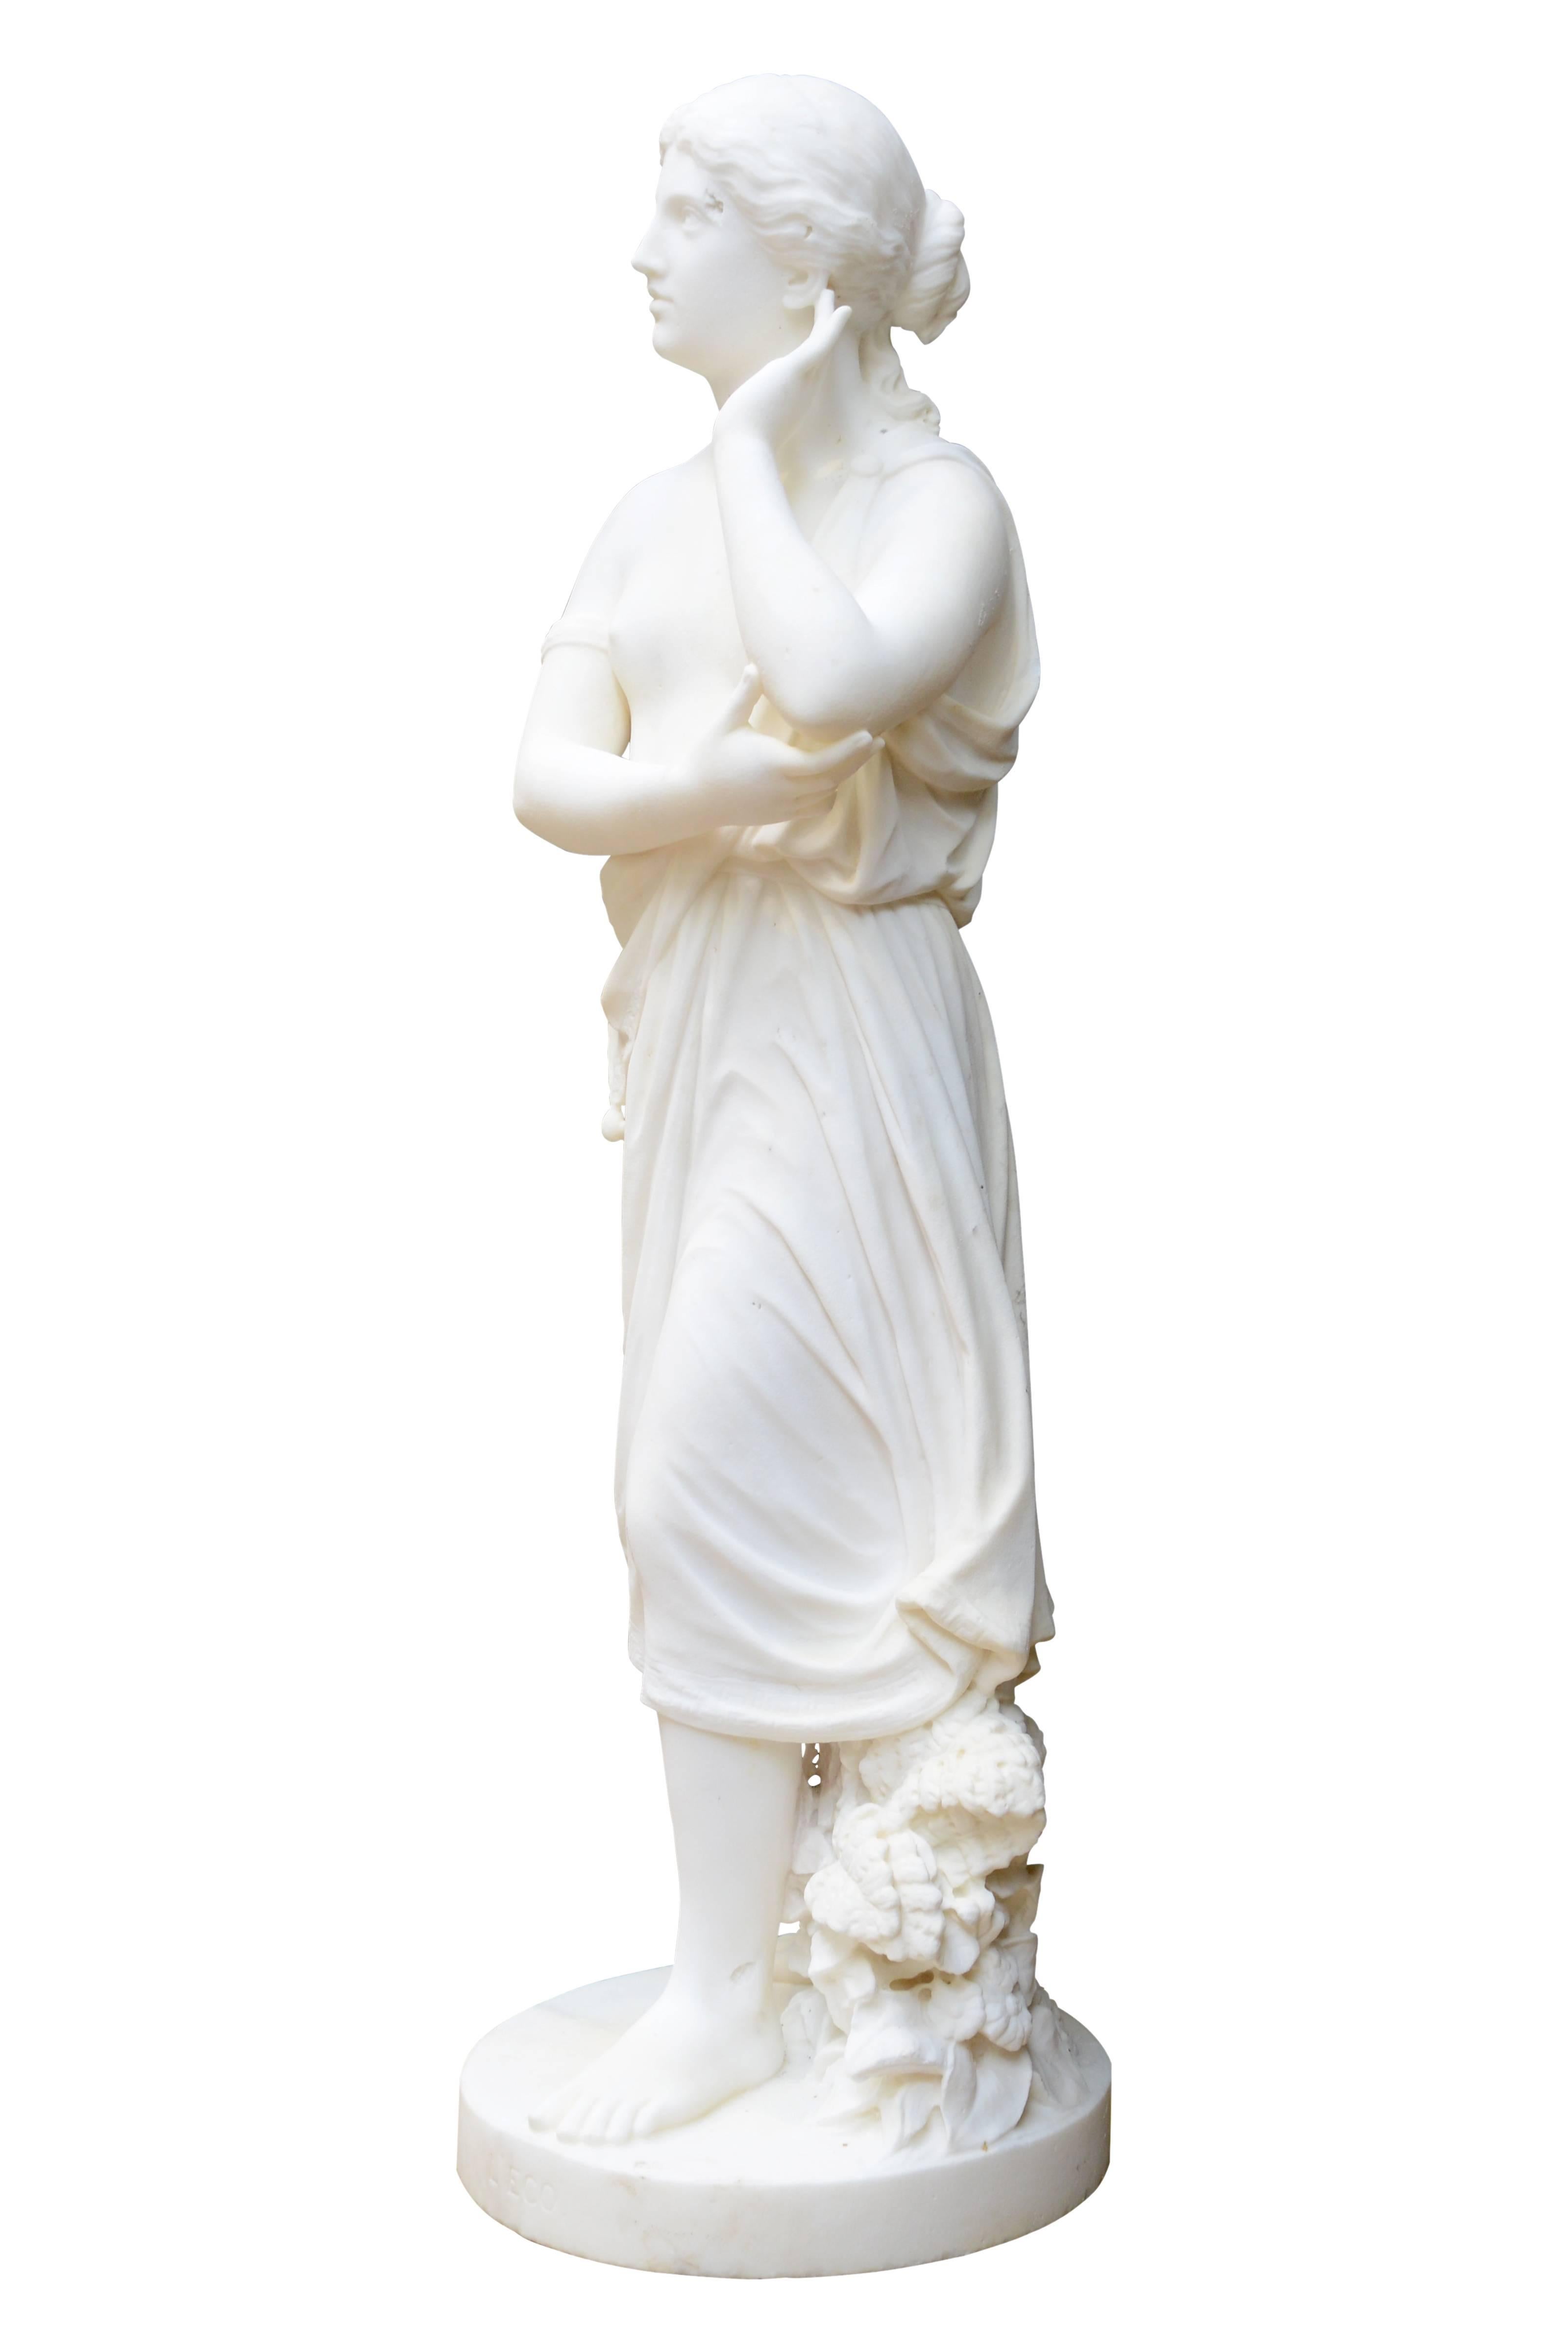 Dated from the 19th century, circa 1892, white Carrara marble statue representing the mythological figure of Echo. She is represented here, wearing a draped dress revealing her chest, one hand in her ear, pretending to listen to his own voice, and